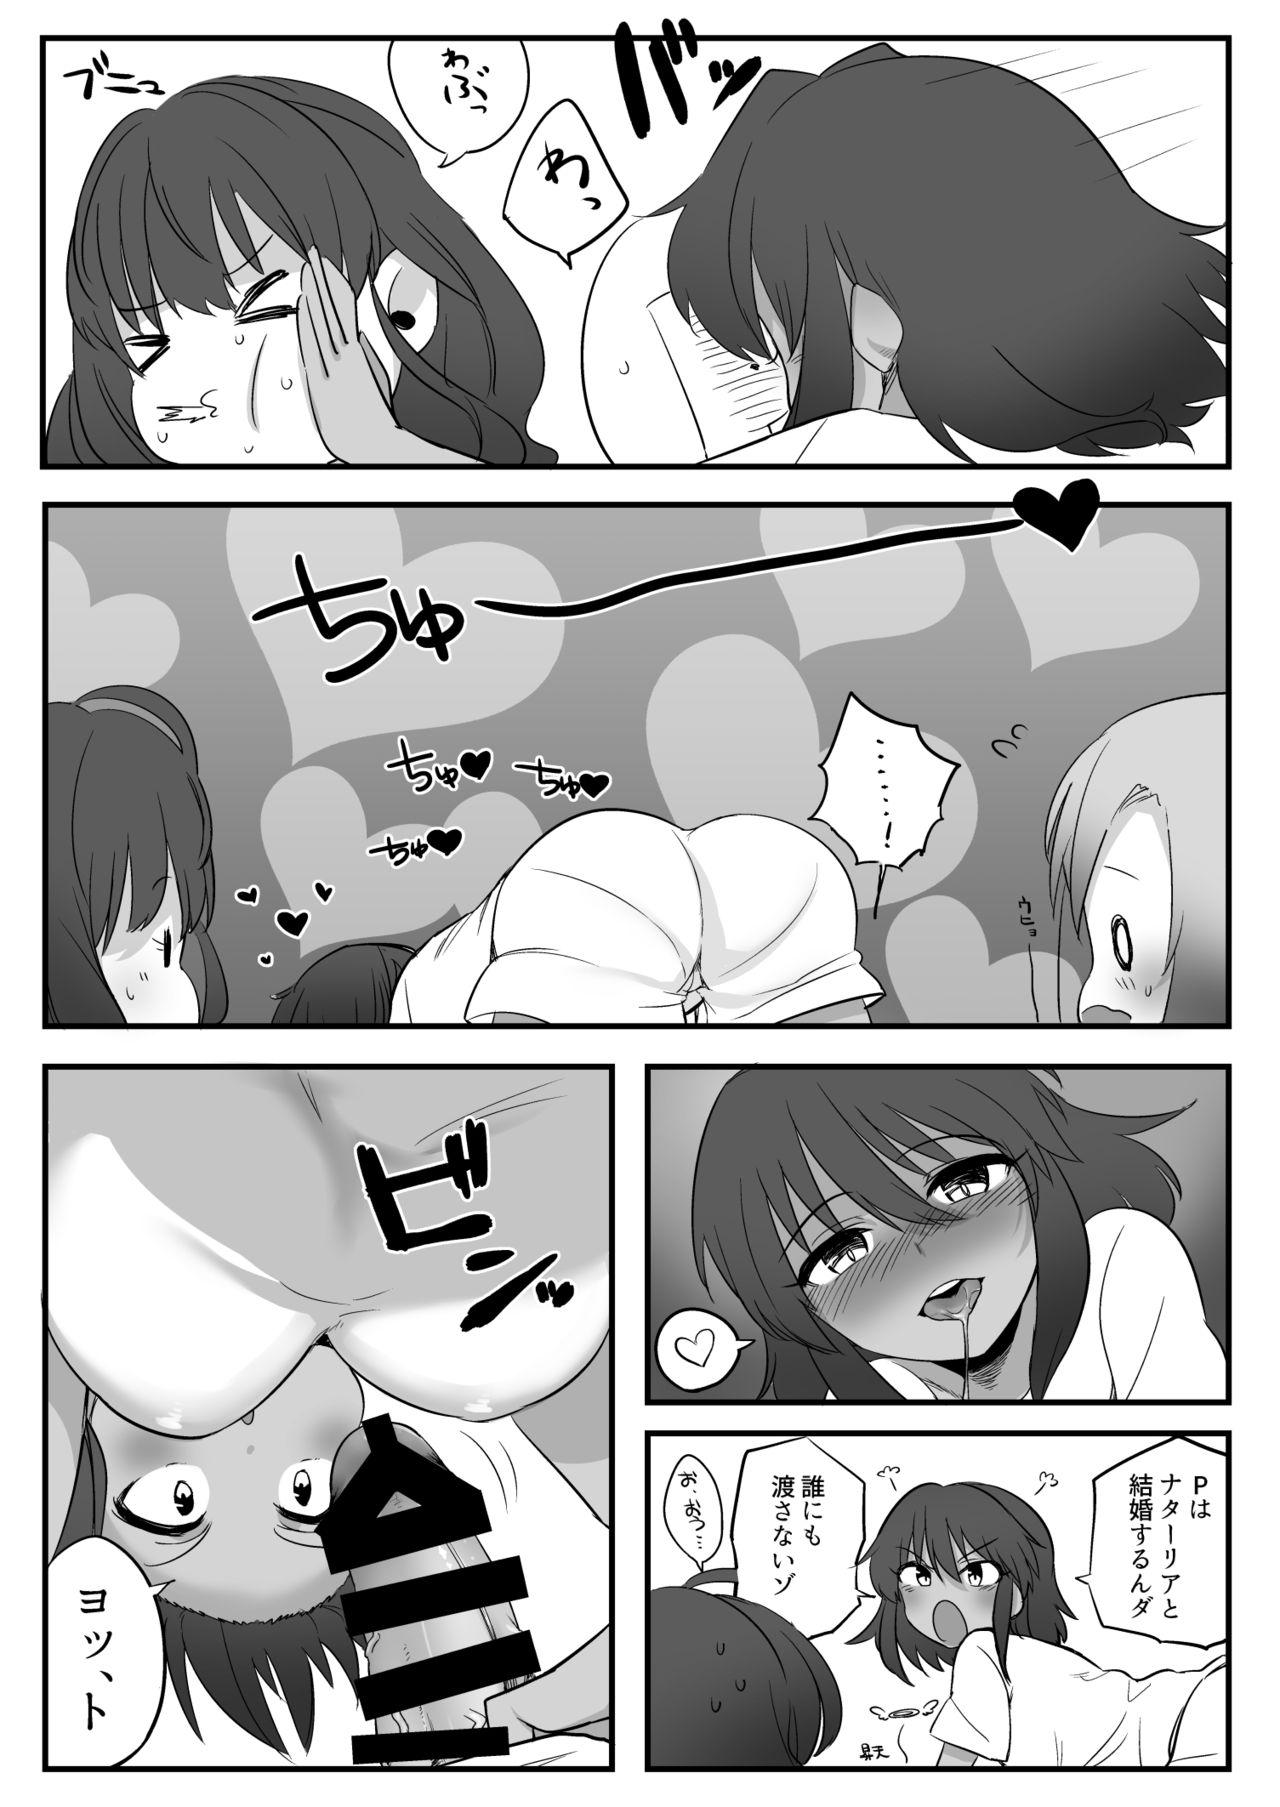 Young Tits 闇のアイプロ本 - The idolmaster Clitoris - Page 7